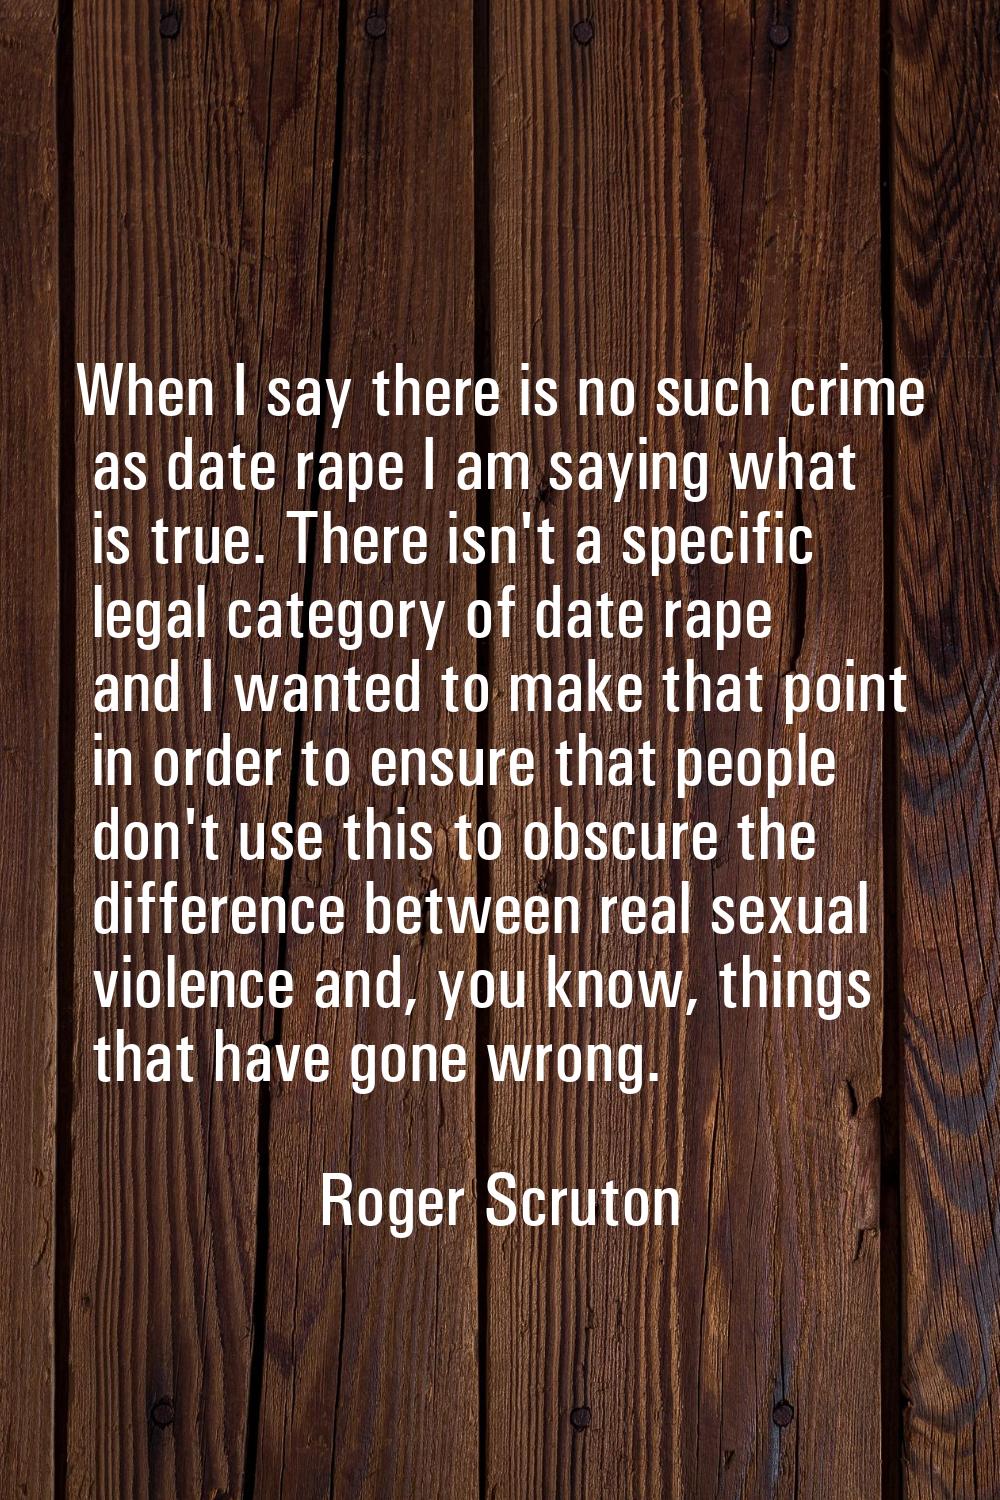 When I say there is no such crime as date rape I am saying what is true. There isn't a specific leg